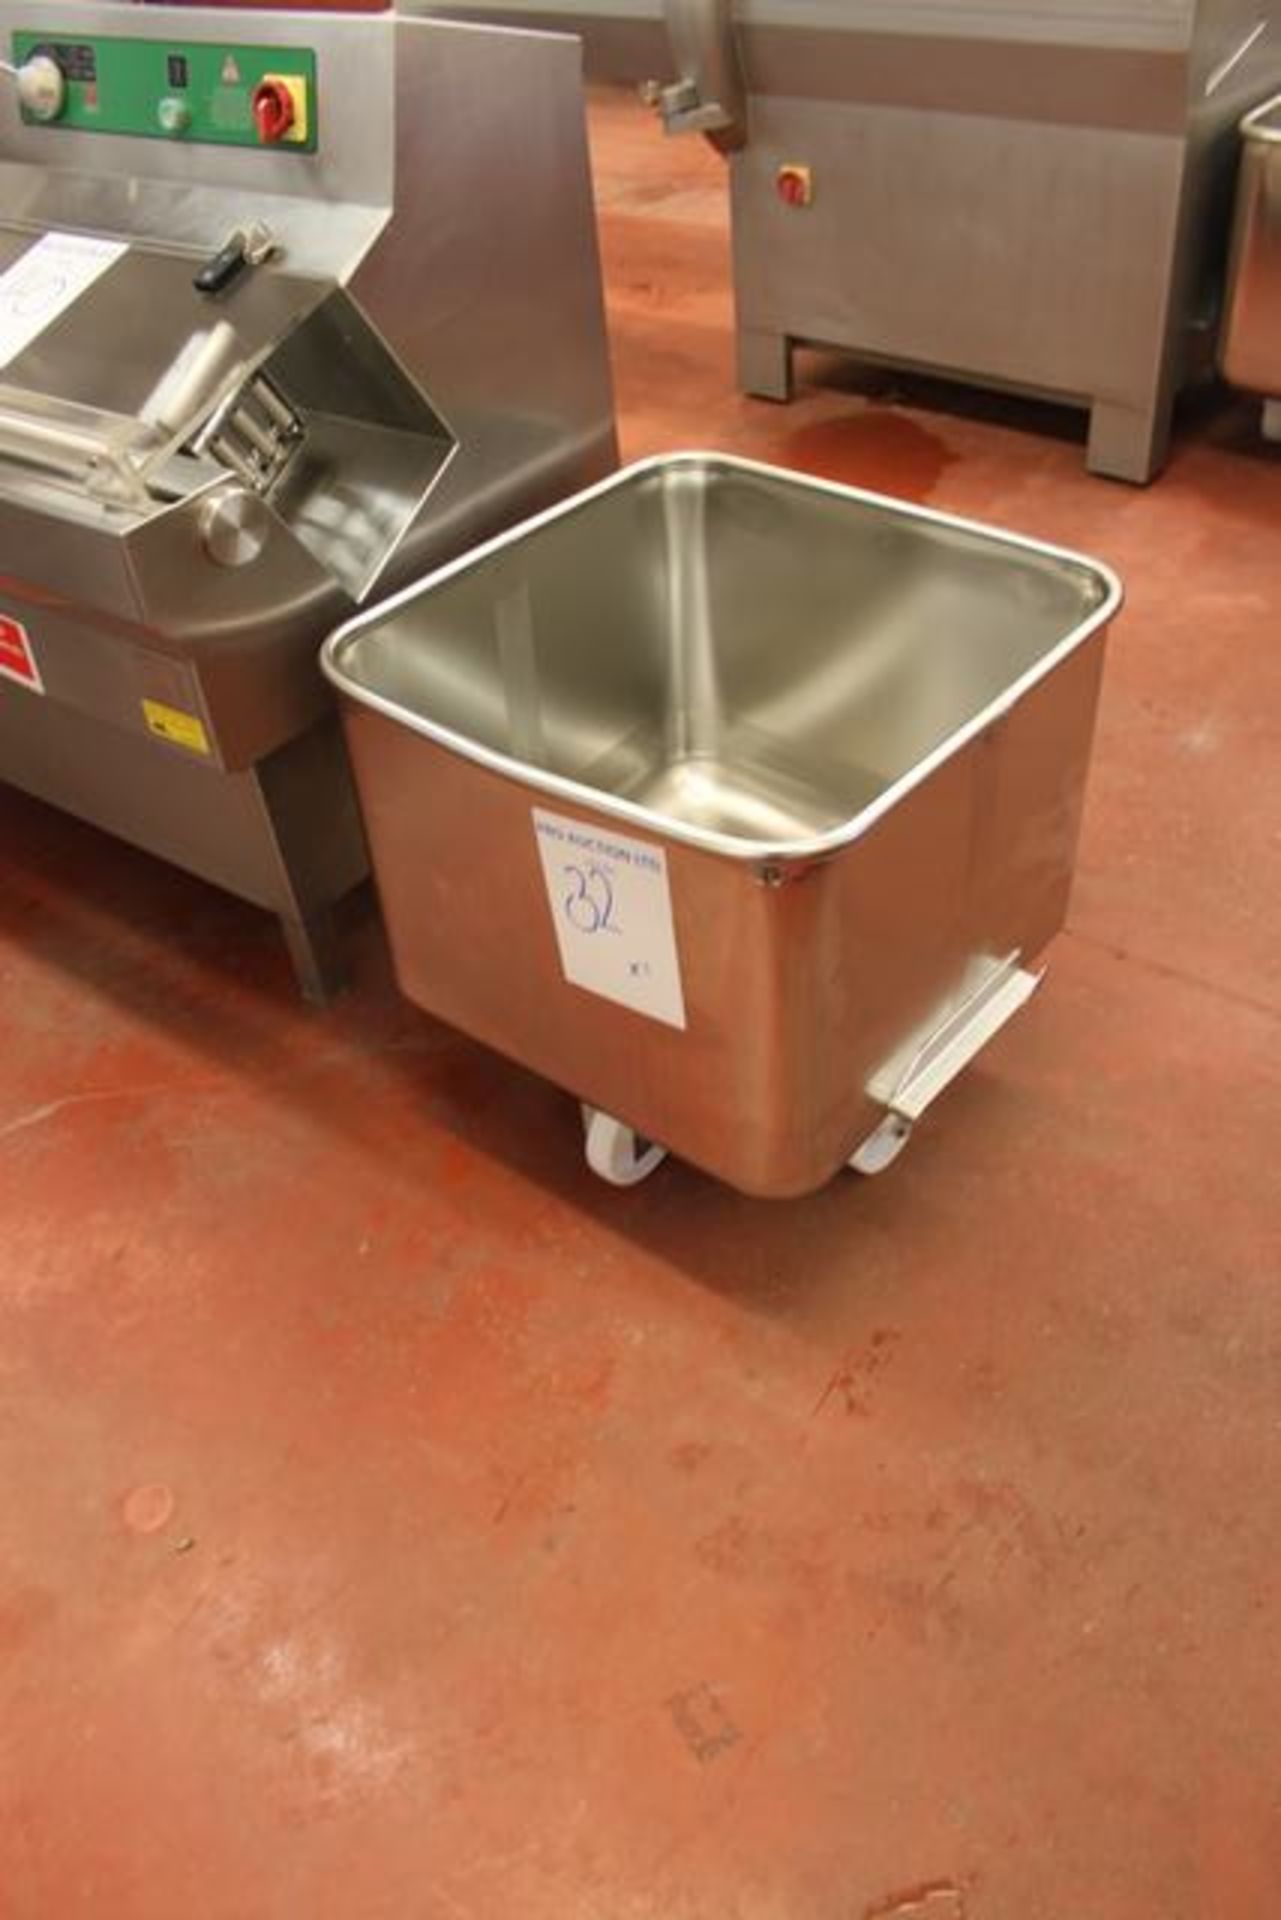 Stainless Steel Tote Eurobin highest quality European manufactured 200 litre capacity Lift out